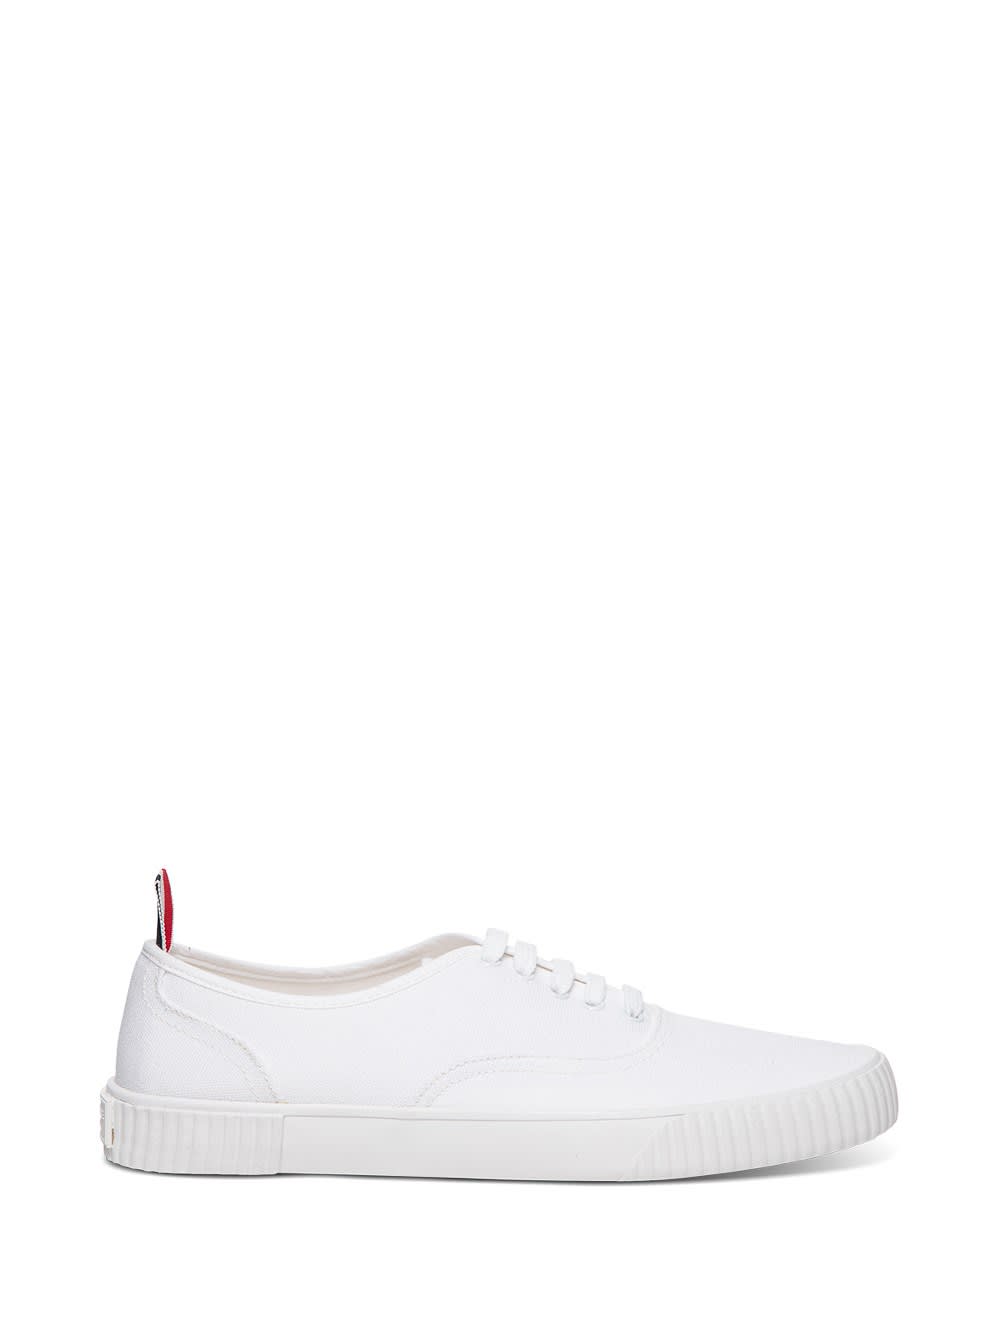 THOM BROWNE WHITE COTTON CANVAS HERITAGE SNEAKERS,MFD201A01588100